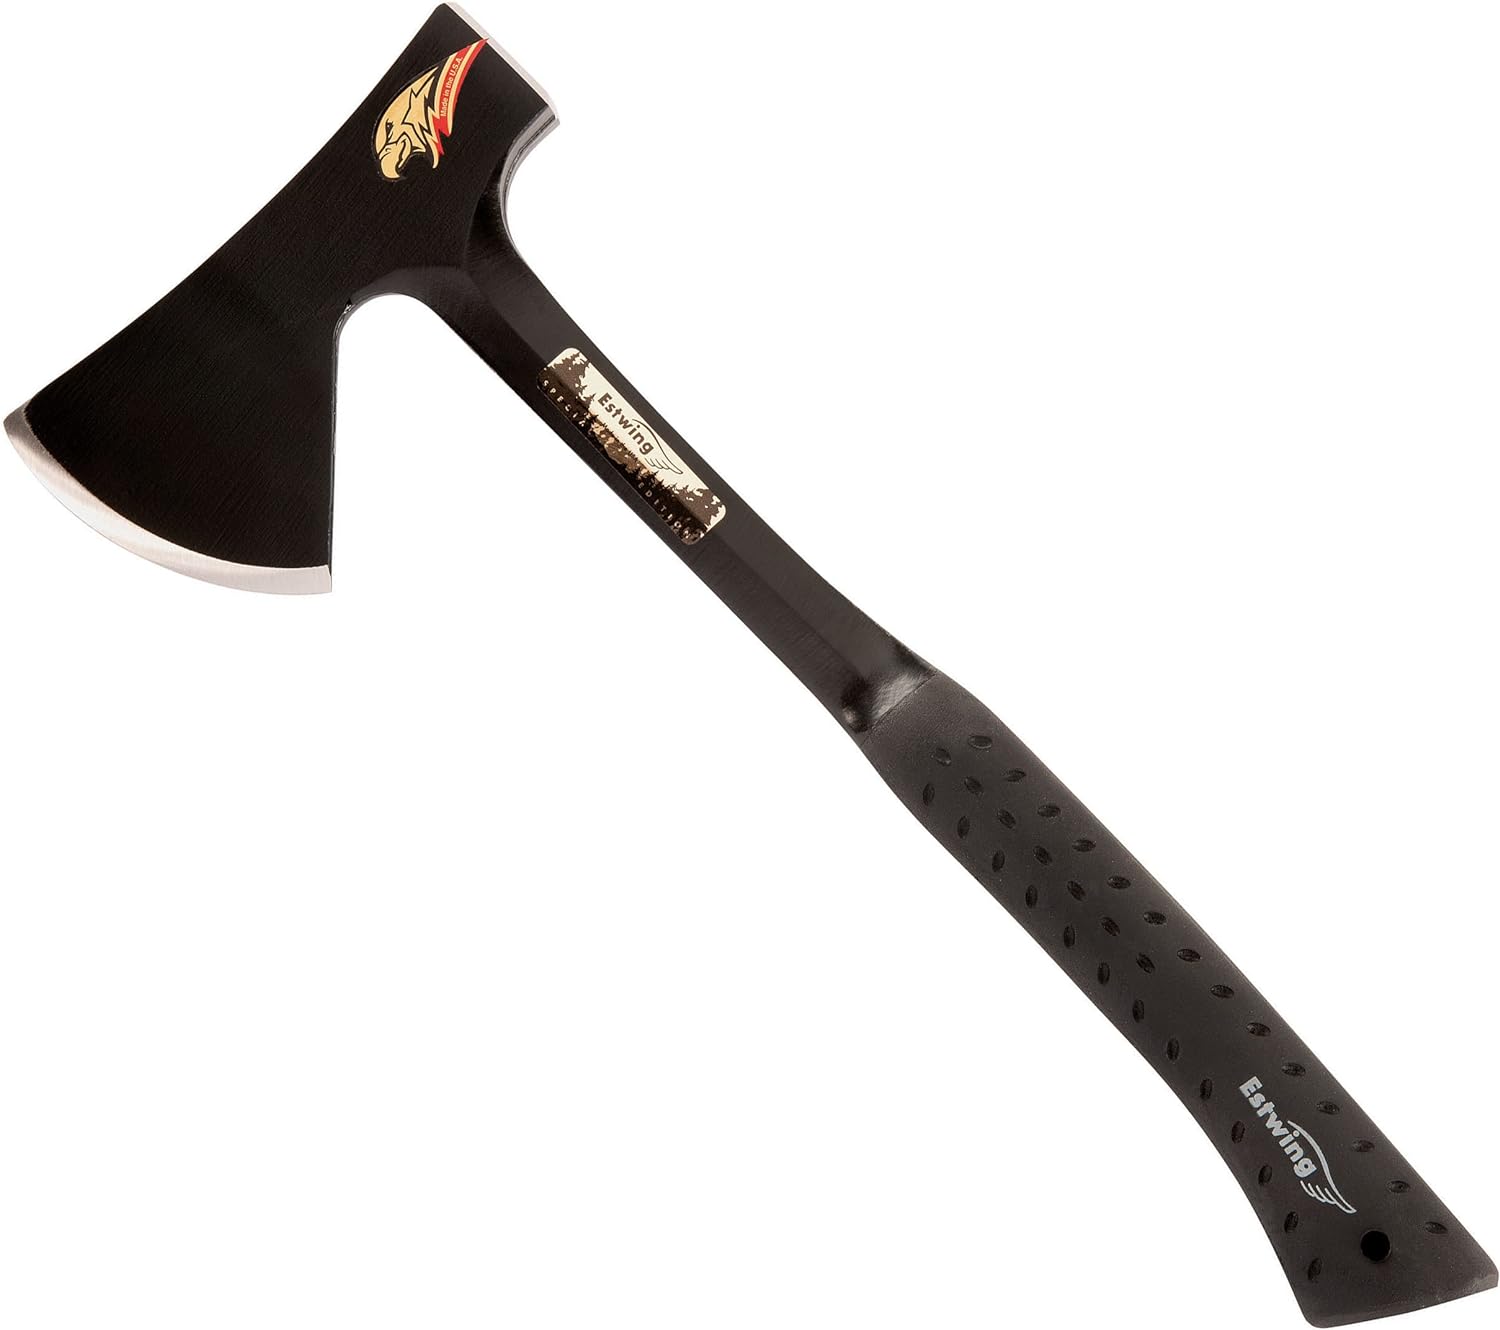 Estwing Special Edition Camper's Axe - 16" Hatchet with Forged Steel Construction